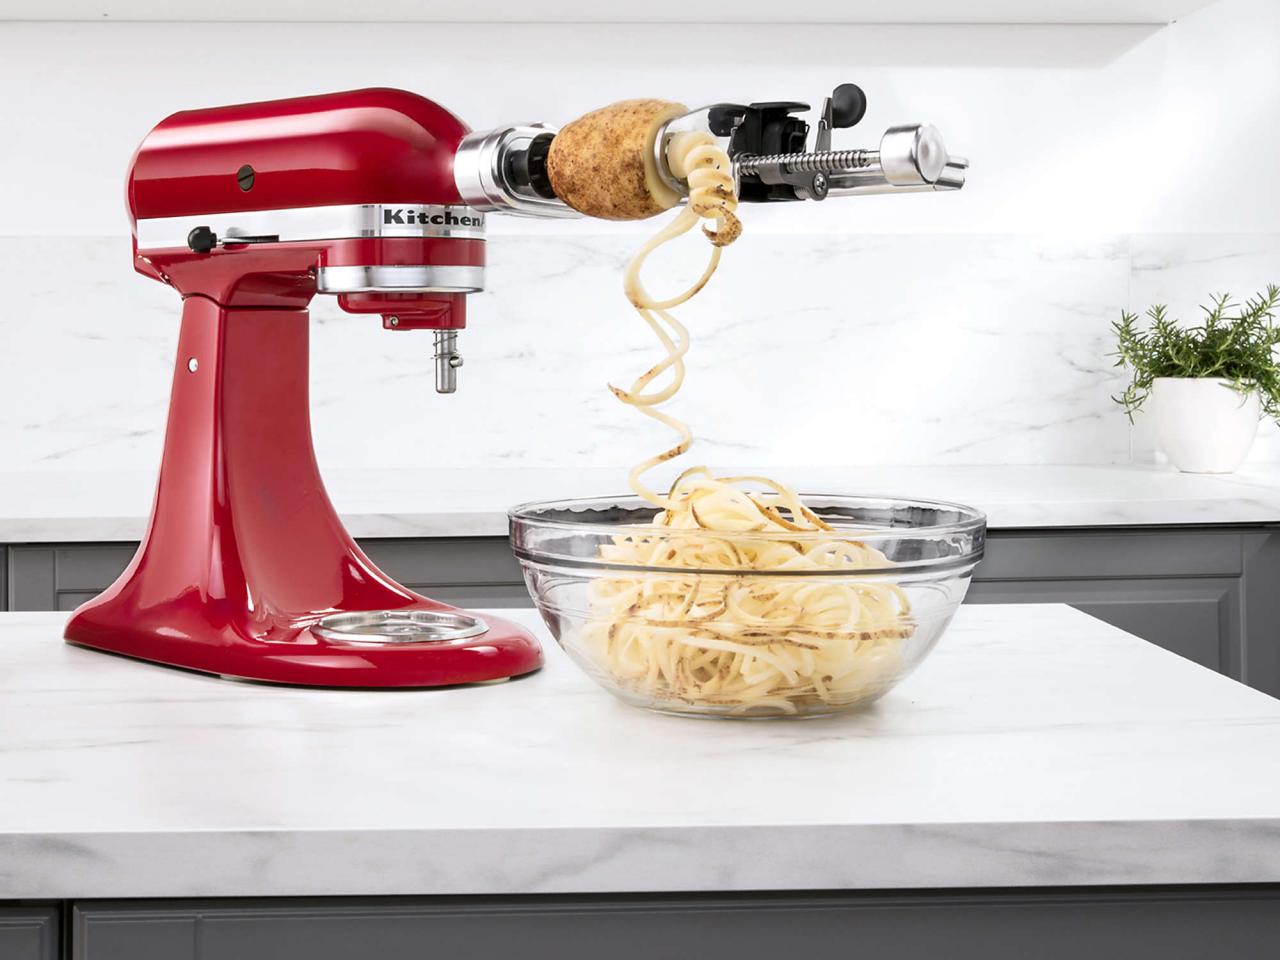 https://food.fnr.sndimg.com/content/dam/images/food/products/2019/12/11/rx_kitchenaid-5-blade-spiralizer-with-peel-core-and-slice-stand-mixer-attachment.jpeg.rend.hgtvcom.1280.960.suffix/1576093228574.jpeg